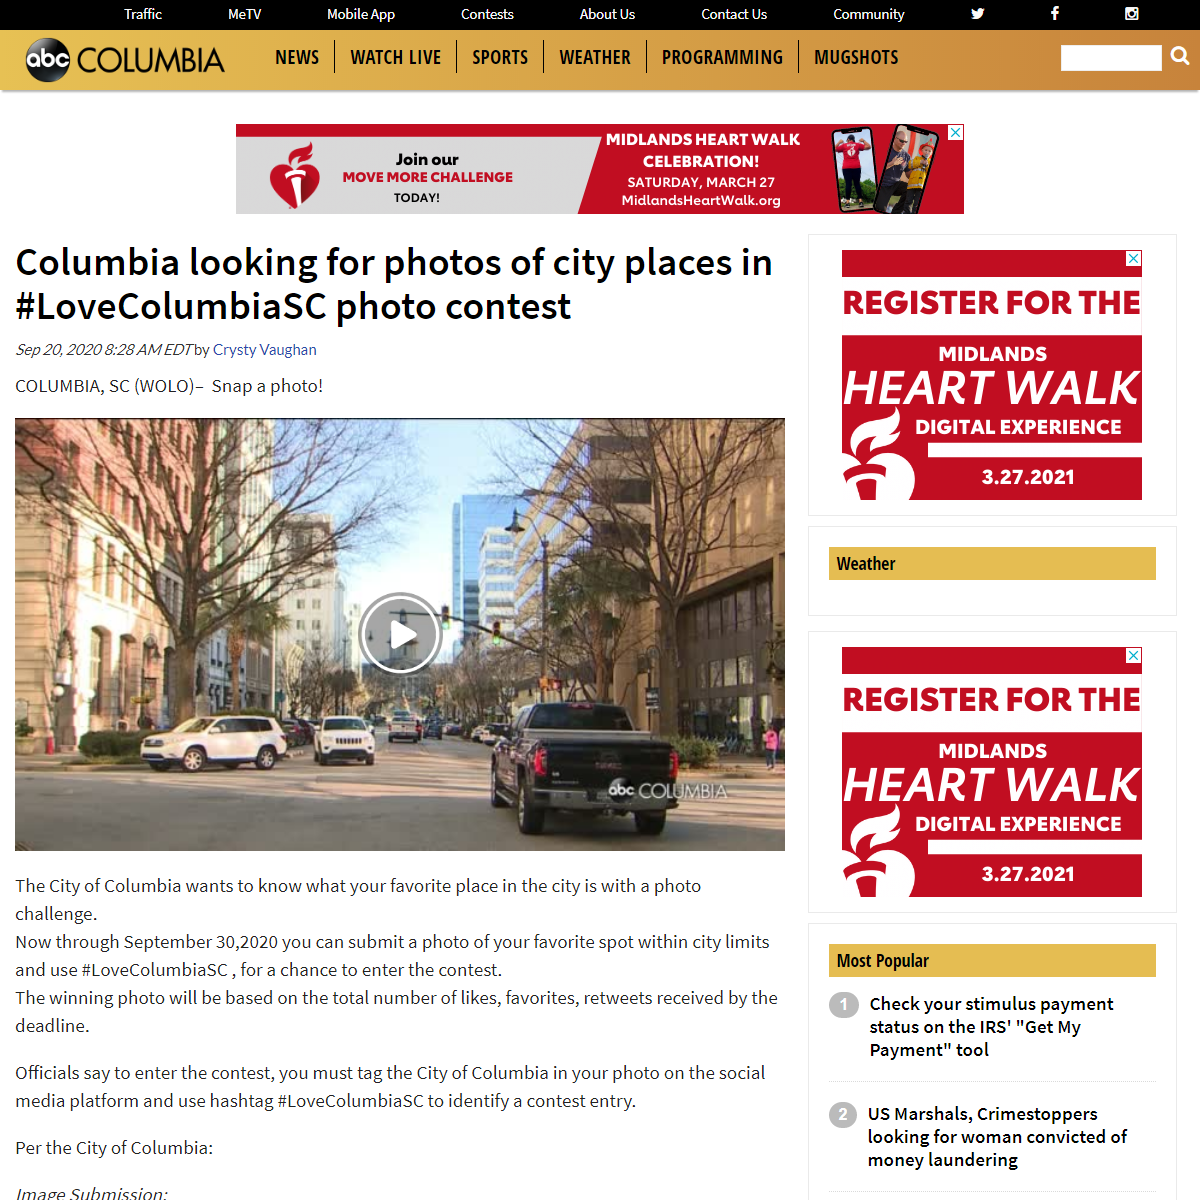 A complete backup of https://www.abccolumbia.com/2020/09/20/columbia-looking-for-photos-of-city-places-in-lovecolumbiasc-photo-c